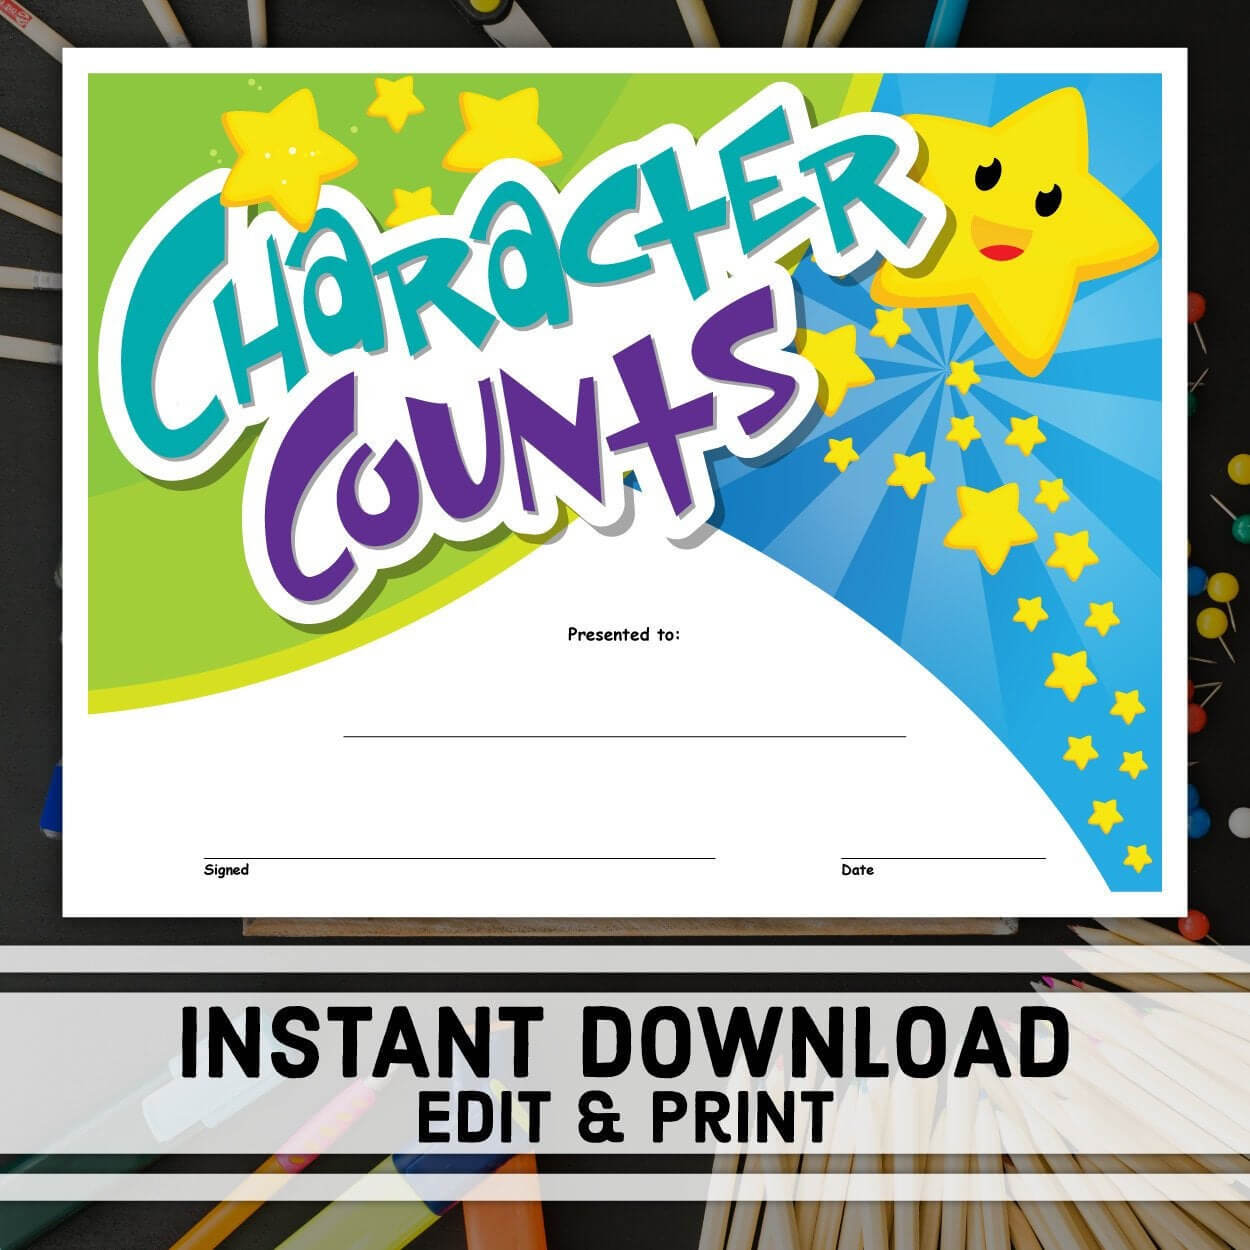 Character Counts Certificate | Instant Download | Printable Award |  Editable Certificate Templates | School Certificates | Student Award Throughout Update Certificates That Use Certificate Templates